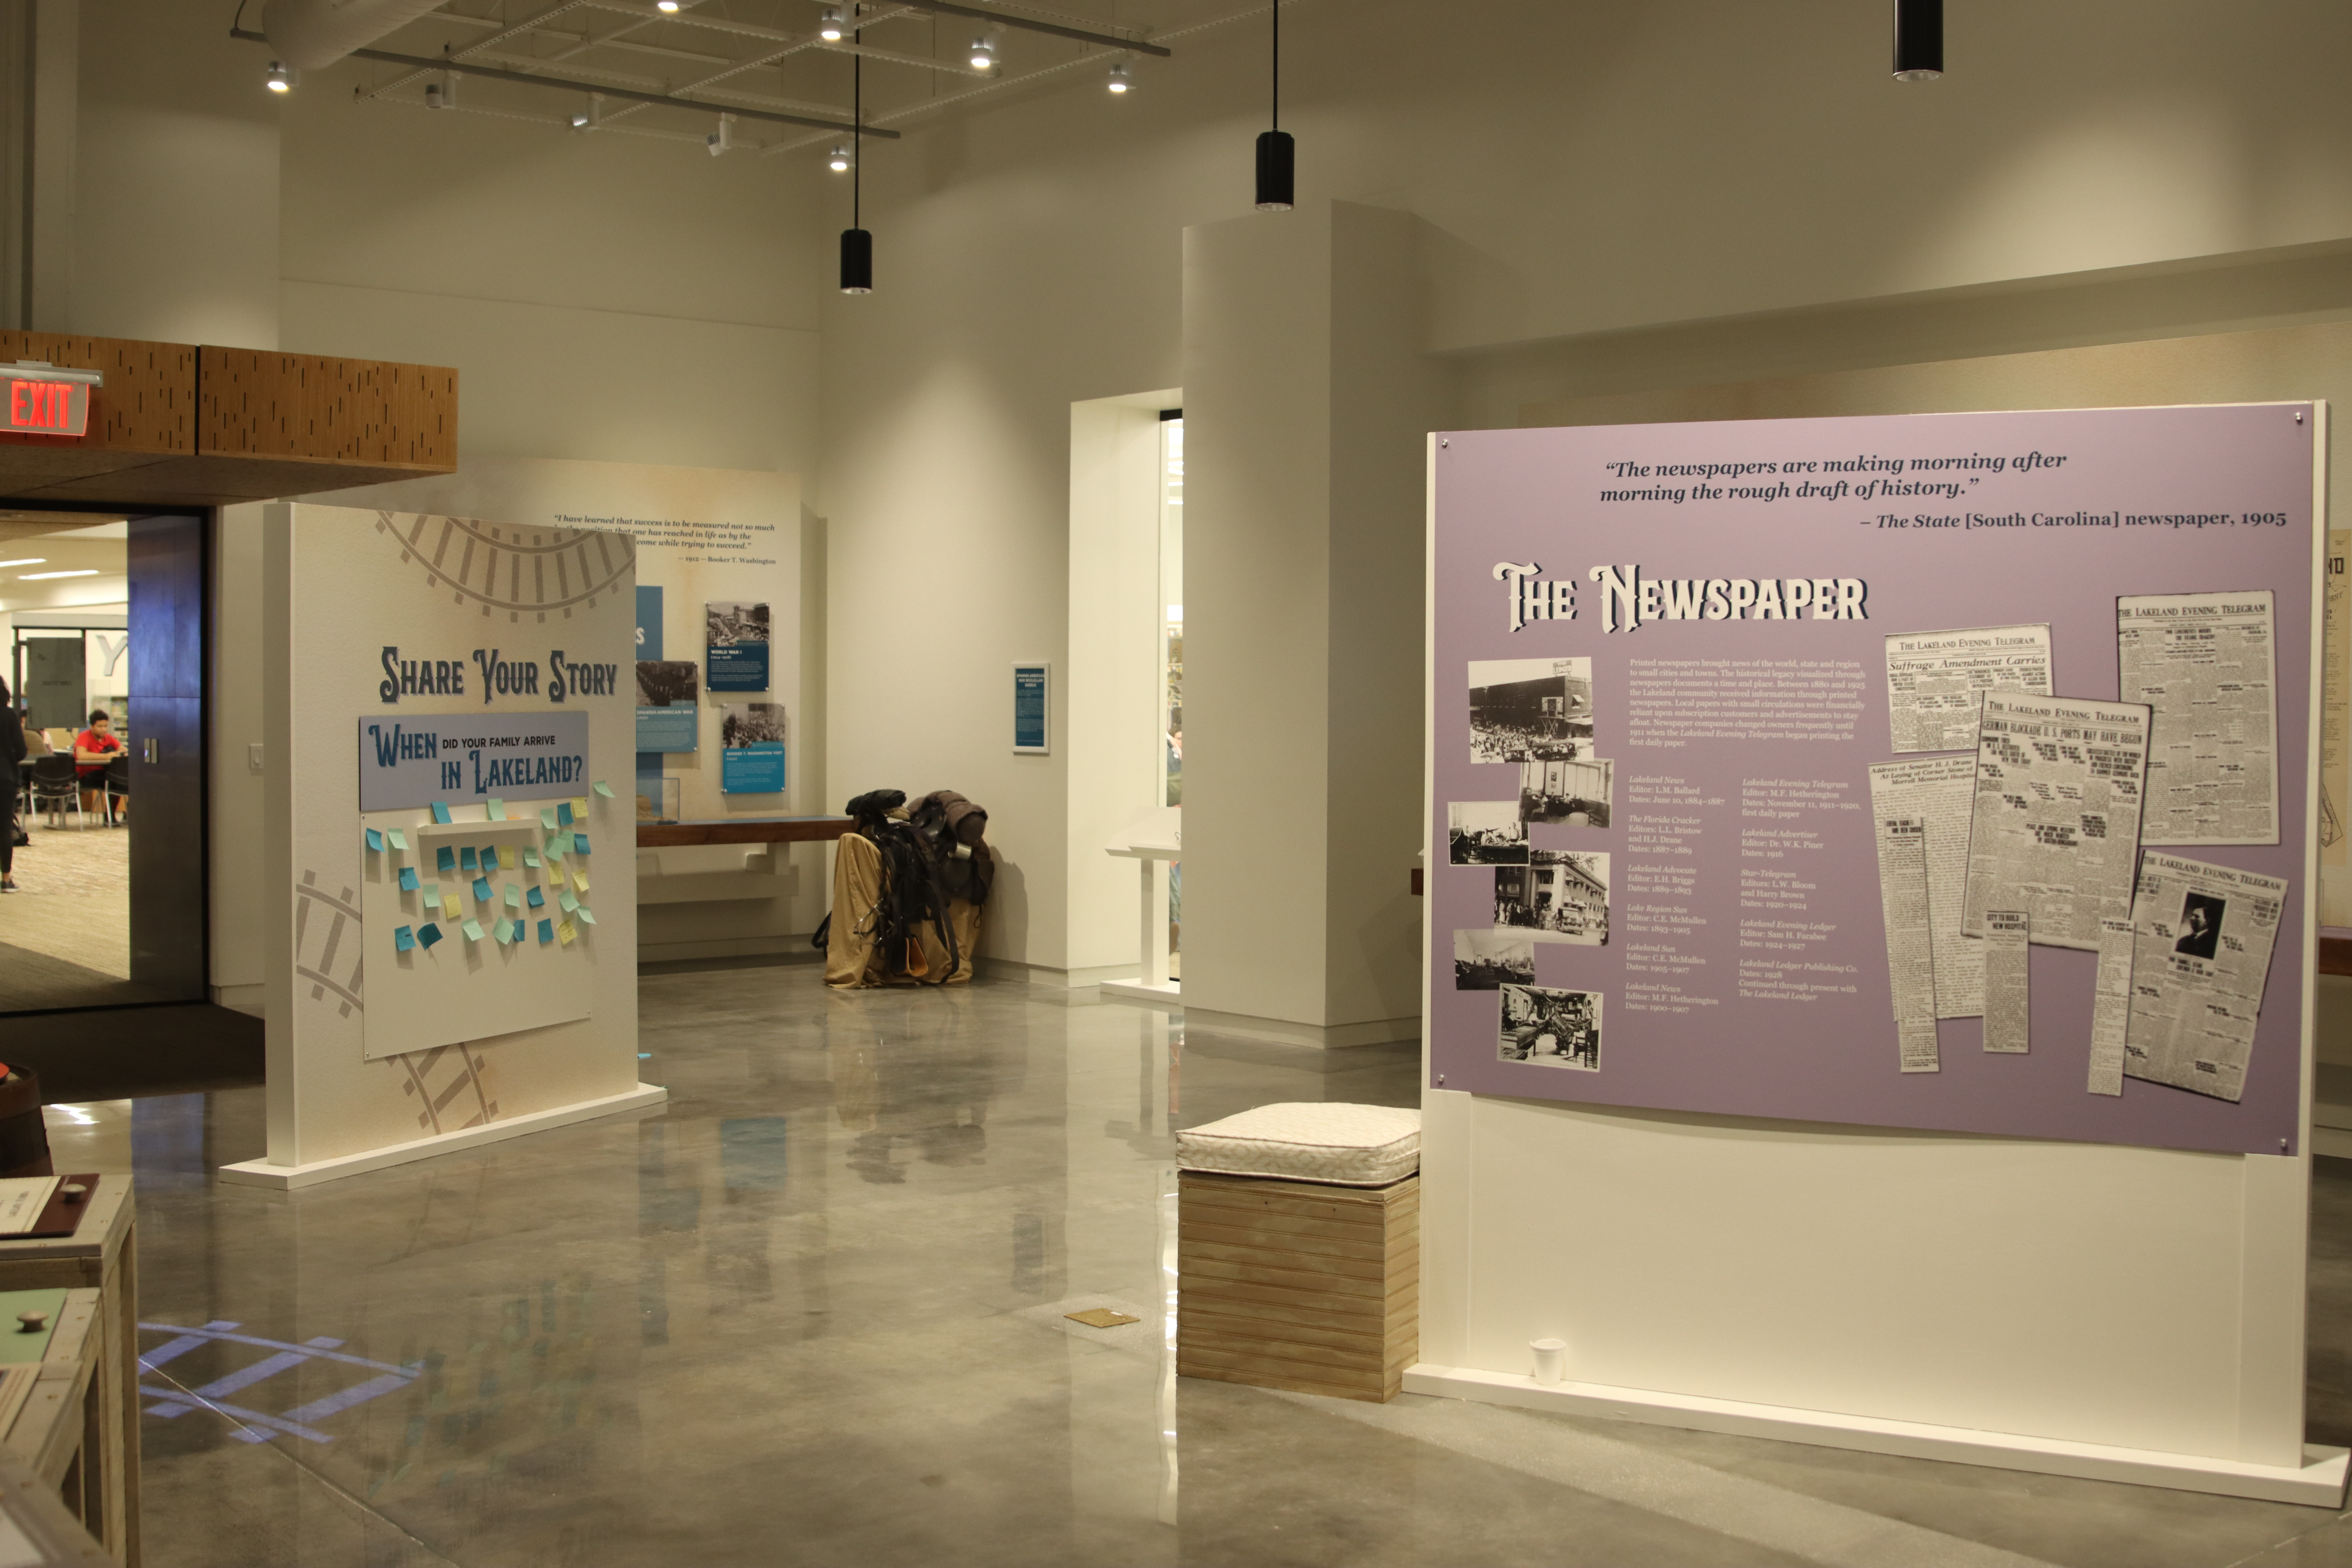 View within the Lakeland History and Culture Center of two information panels, on left "Share Your Story" and on right, "The Newspaper"